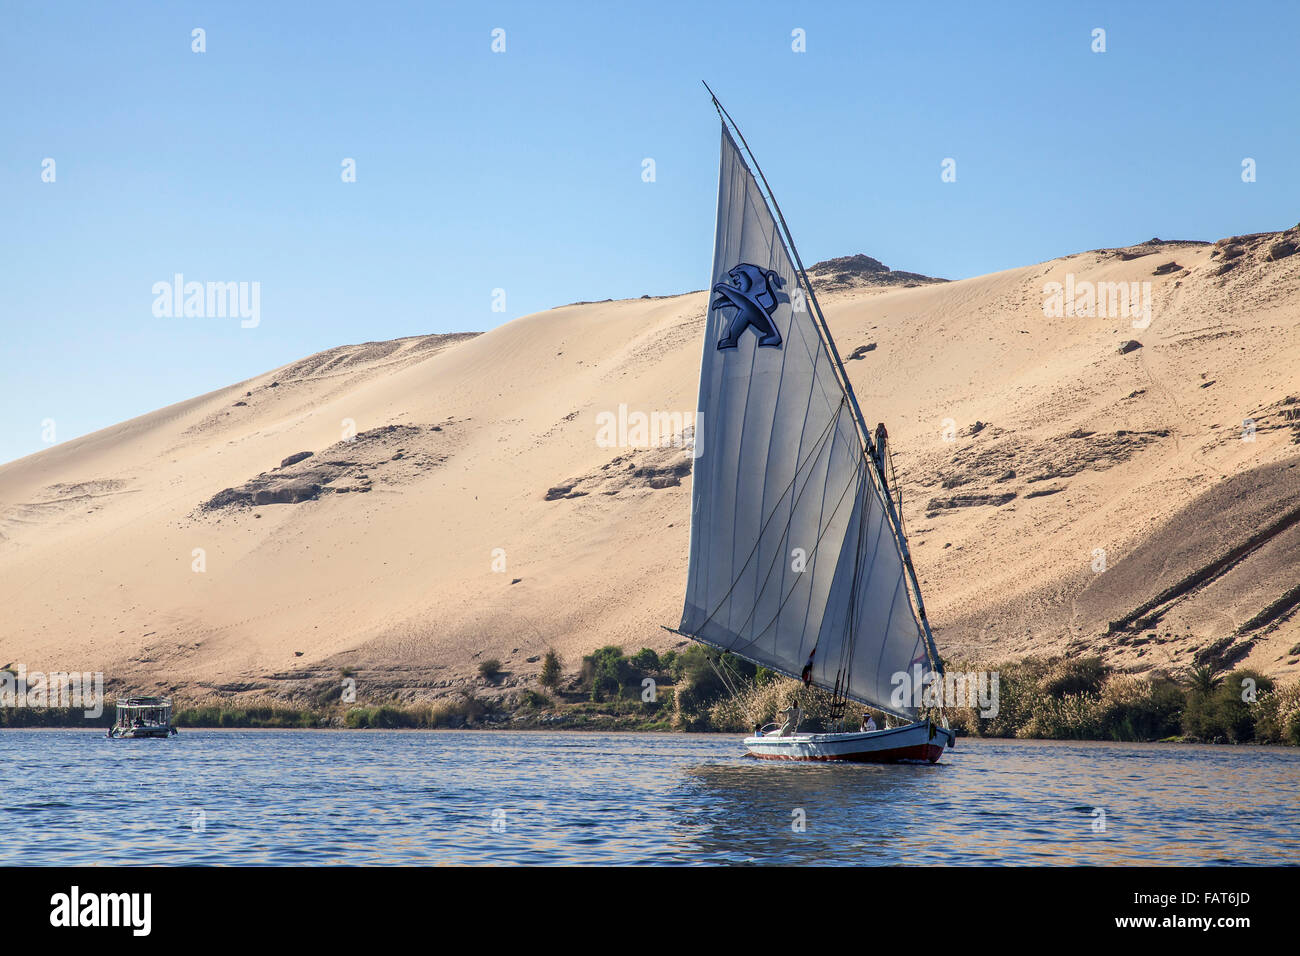 Felucca, traditional wooden sailing boat on the river Nile near Aswan southern Egypt Stock Photo